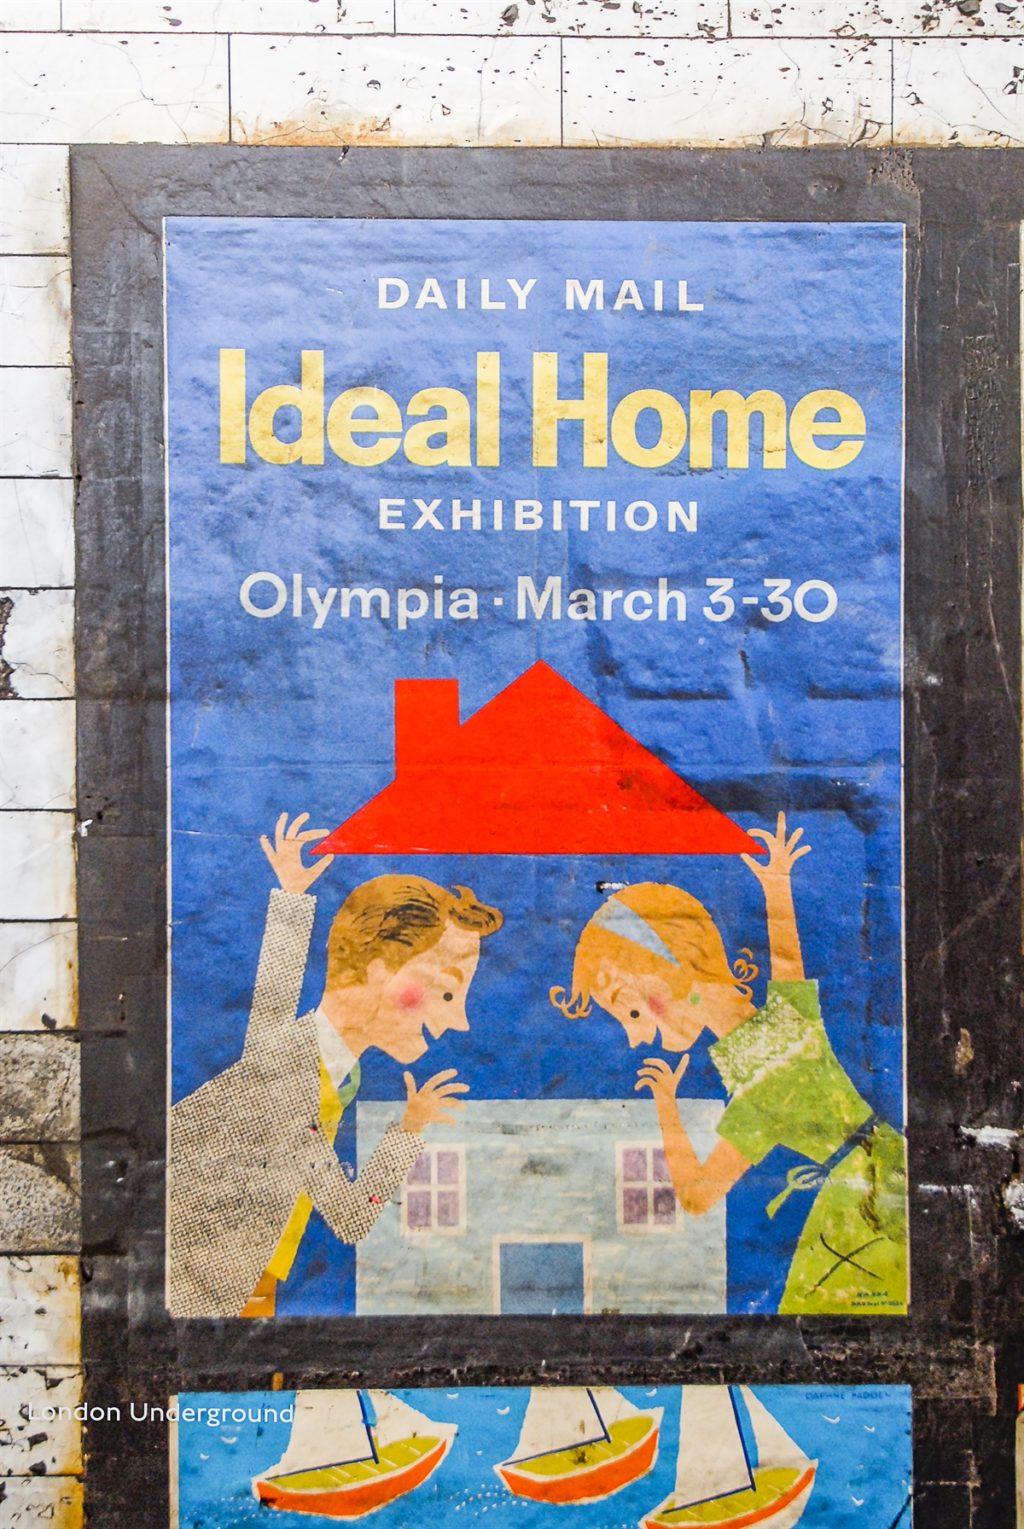 Advertising time capsule at Notting Hill Gate station in the form of a vintage 1950s poster.